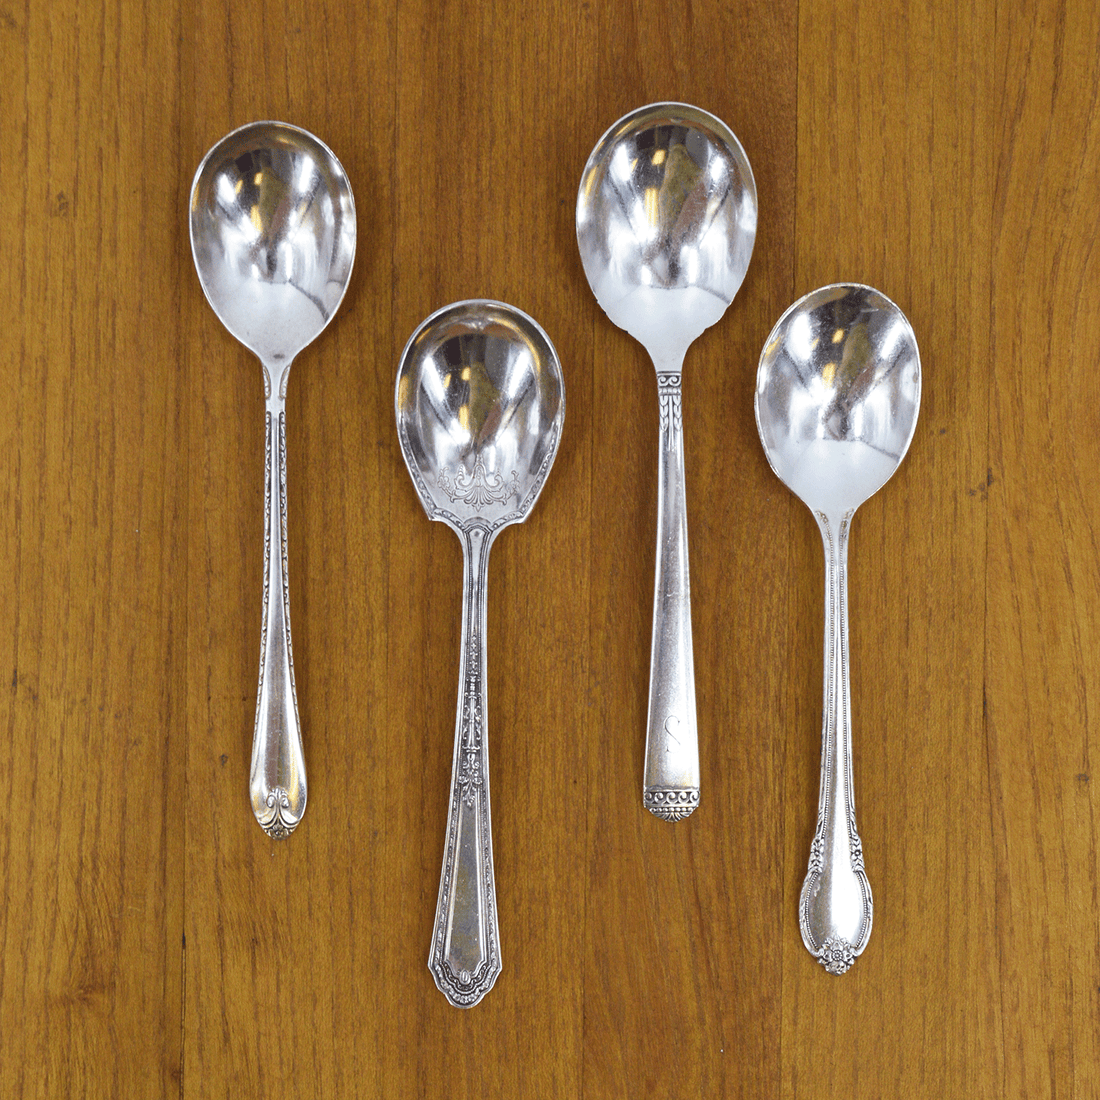 Vintage Silver-Plate Sugar Spoon Set of Four